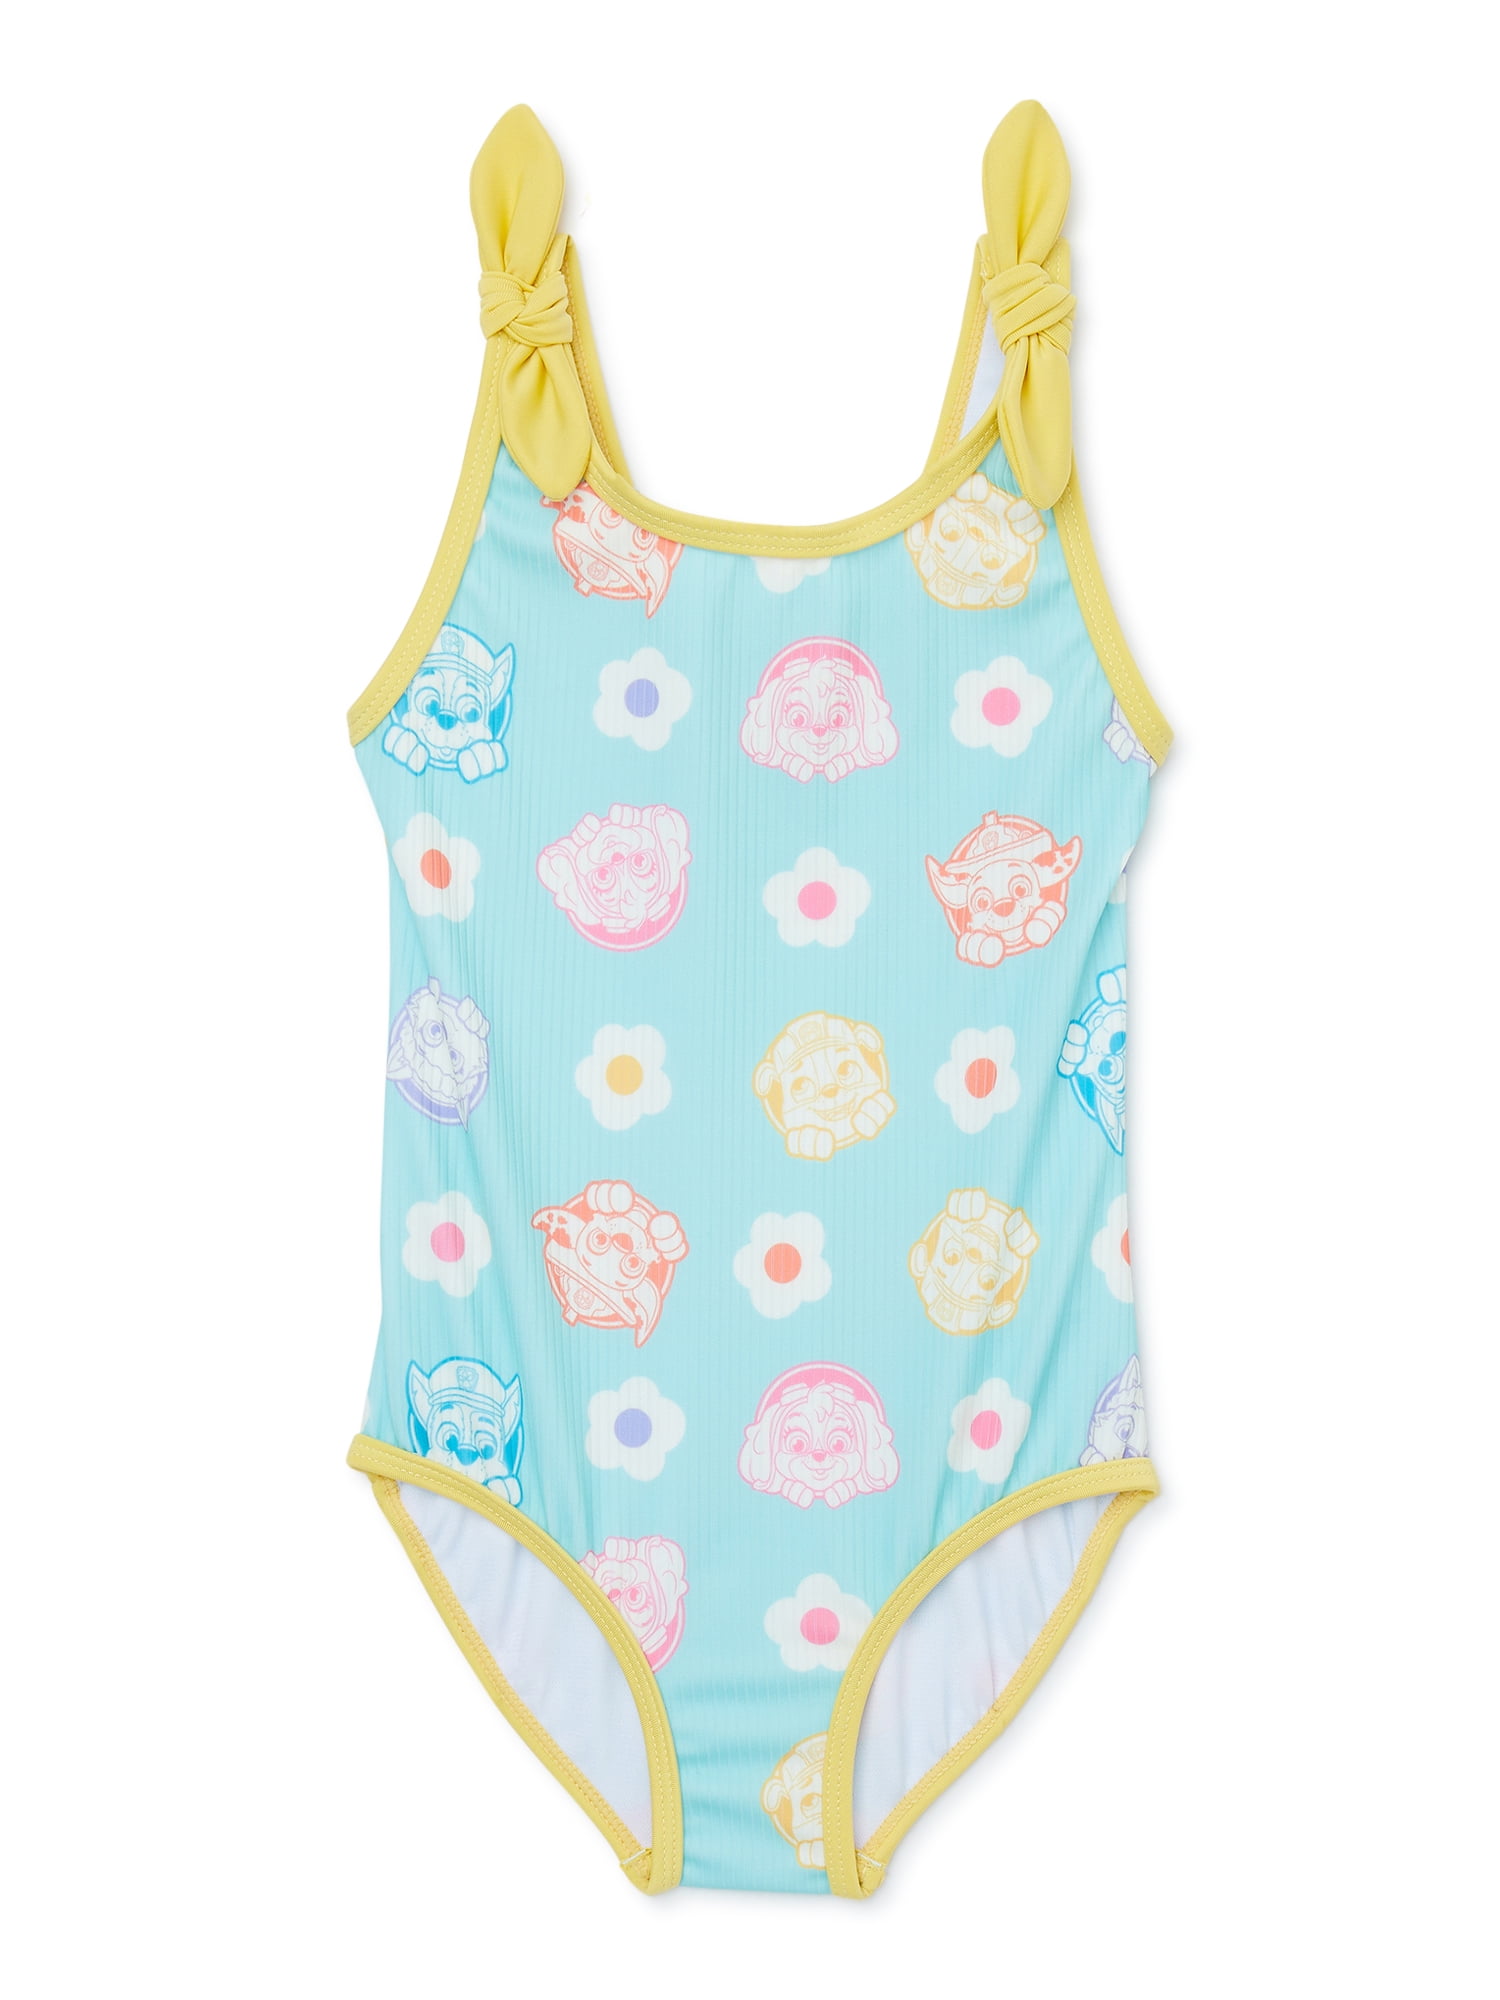 Toddler Girl Character One-Piece Swimsuit, Sizes 12M-5T - Walmart.com